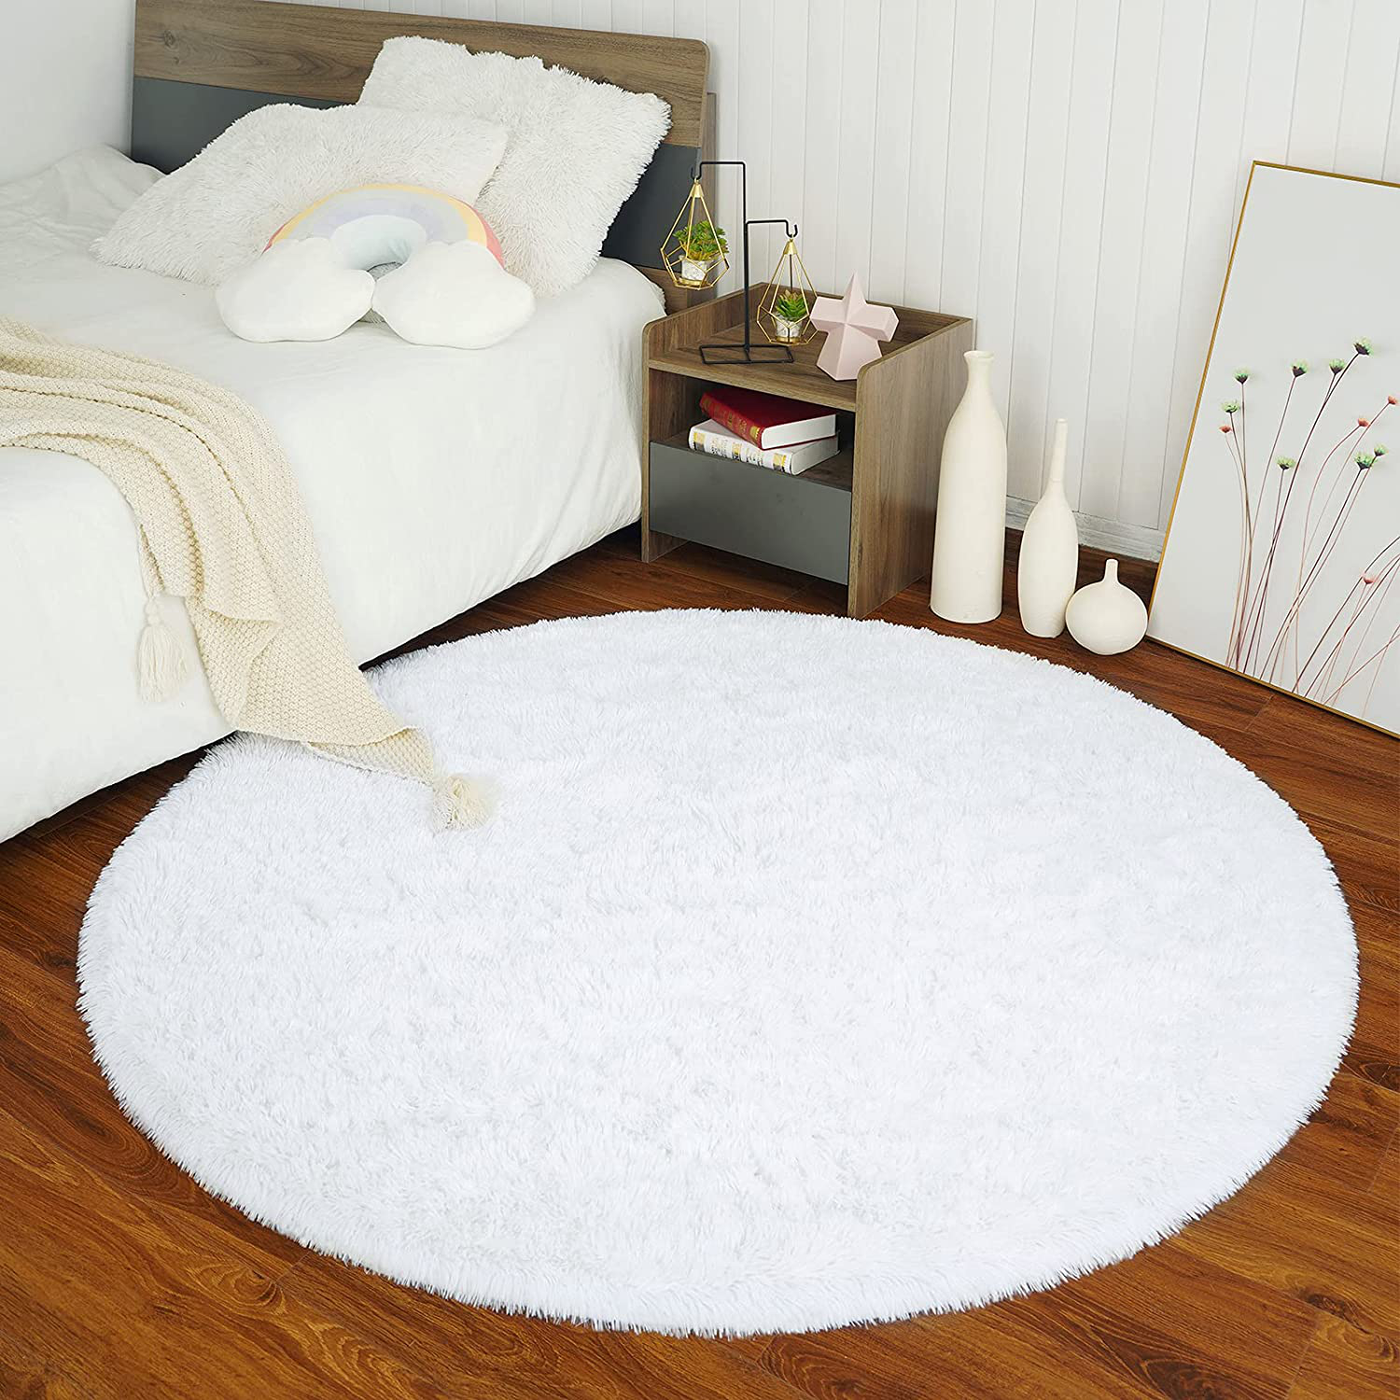 ULTRUG Fluffy Round Rug for Kids Room, Soft Circle Area Rugs for Girls Bedroom, Cute Princess Castle Nursery Rug Shaggy Circular Carpet for Teens Girls Baby Bedroom Home Decor, 5 x 5 Feet White